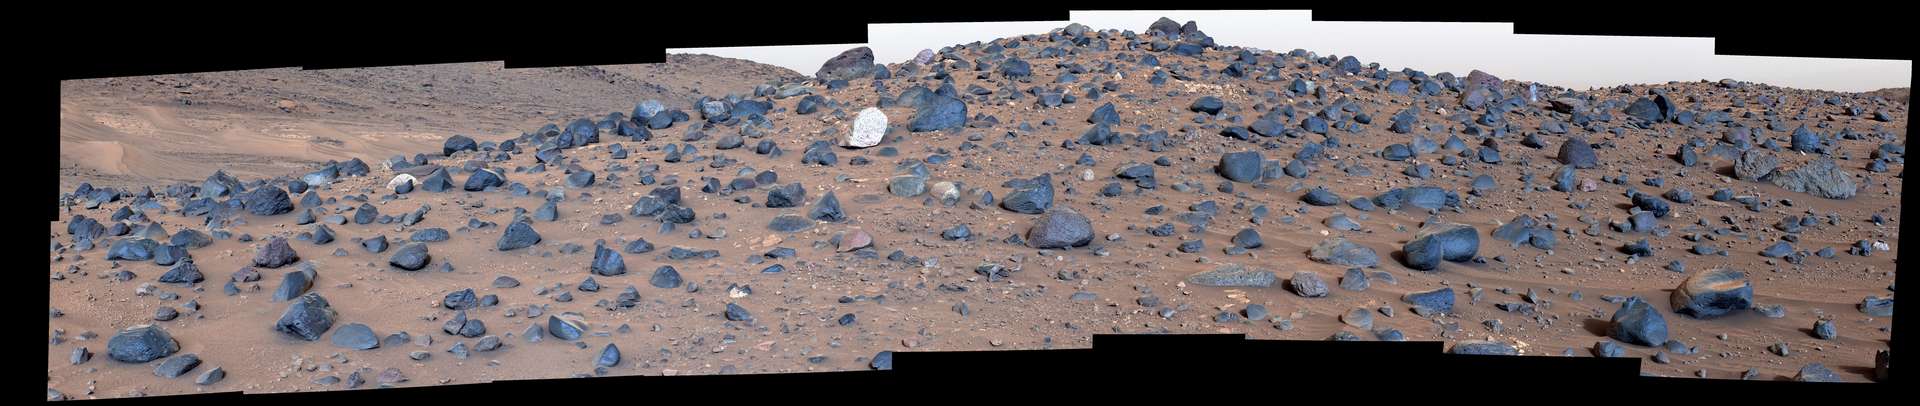 An unparalleled white rock was discovered on the surface of Mars by a rover